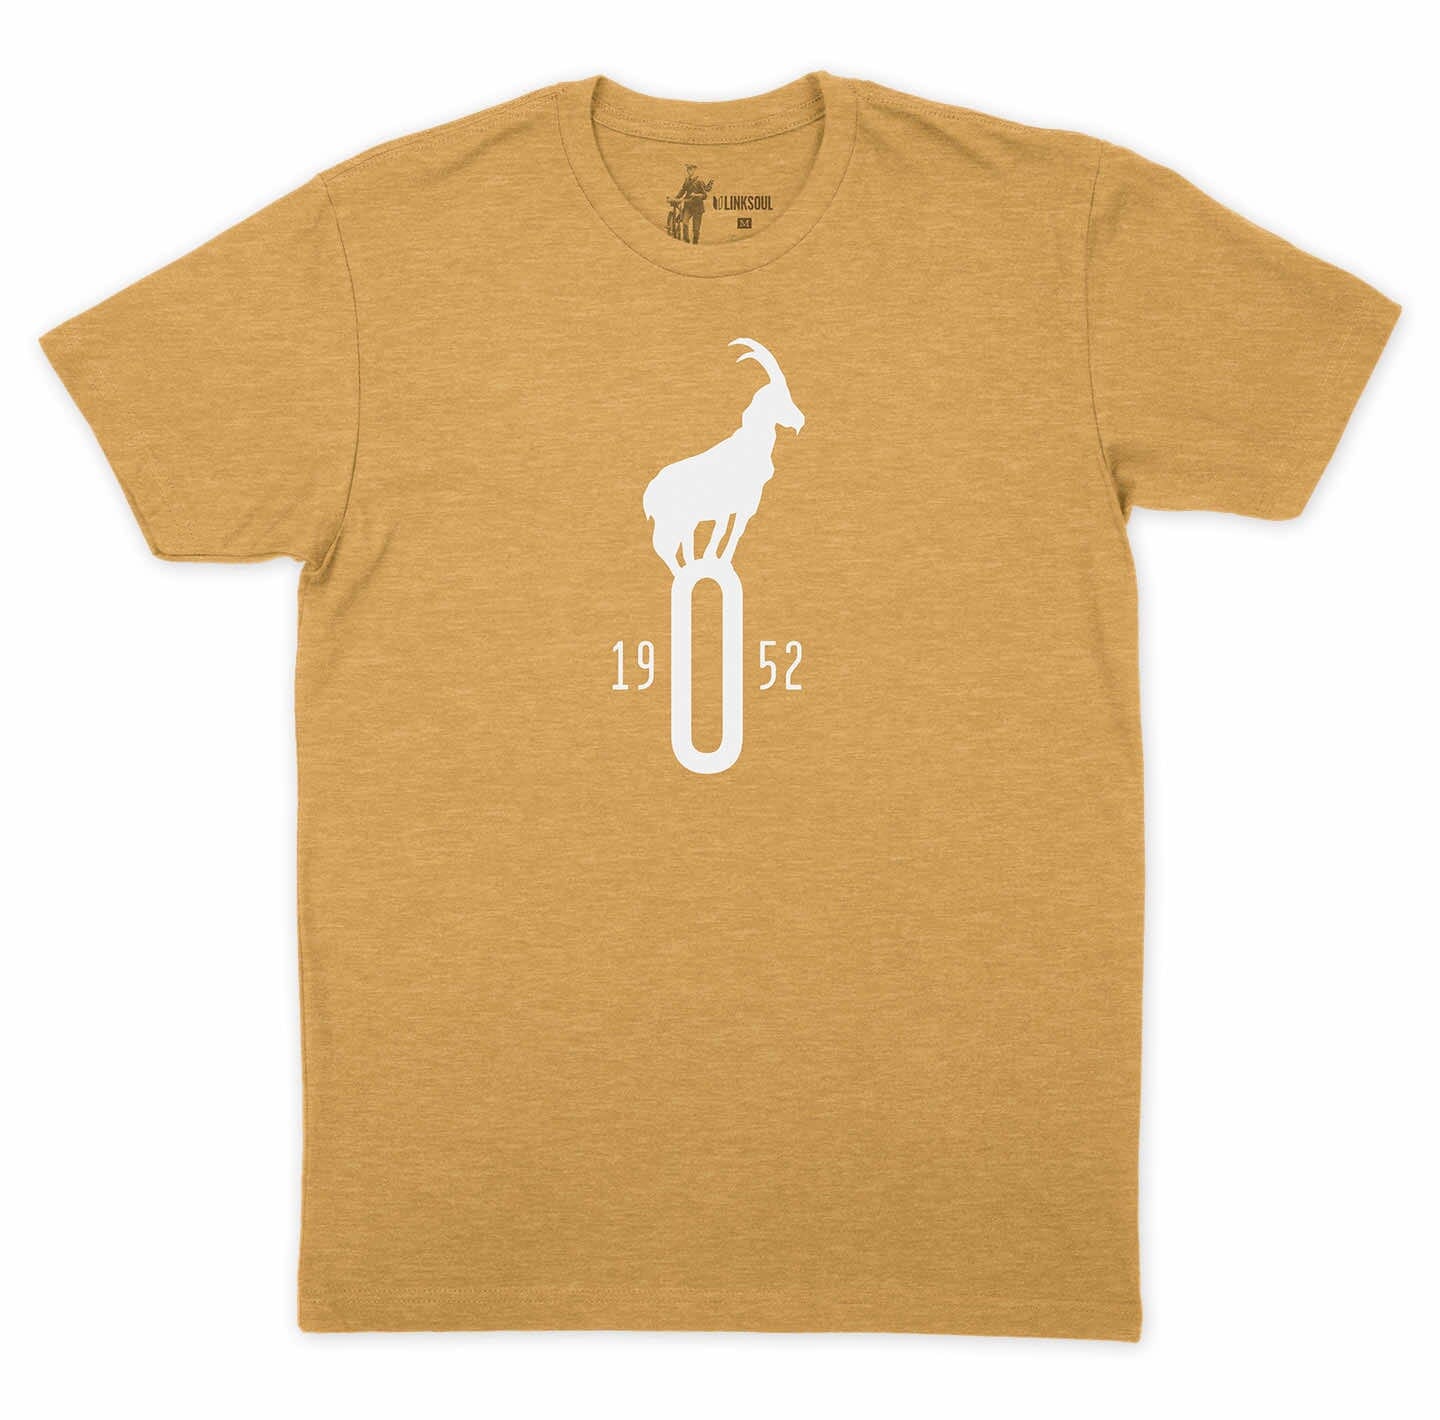 The Goat Hill Park Lite Tee